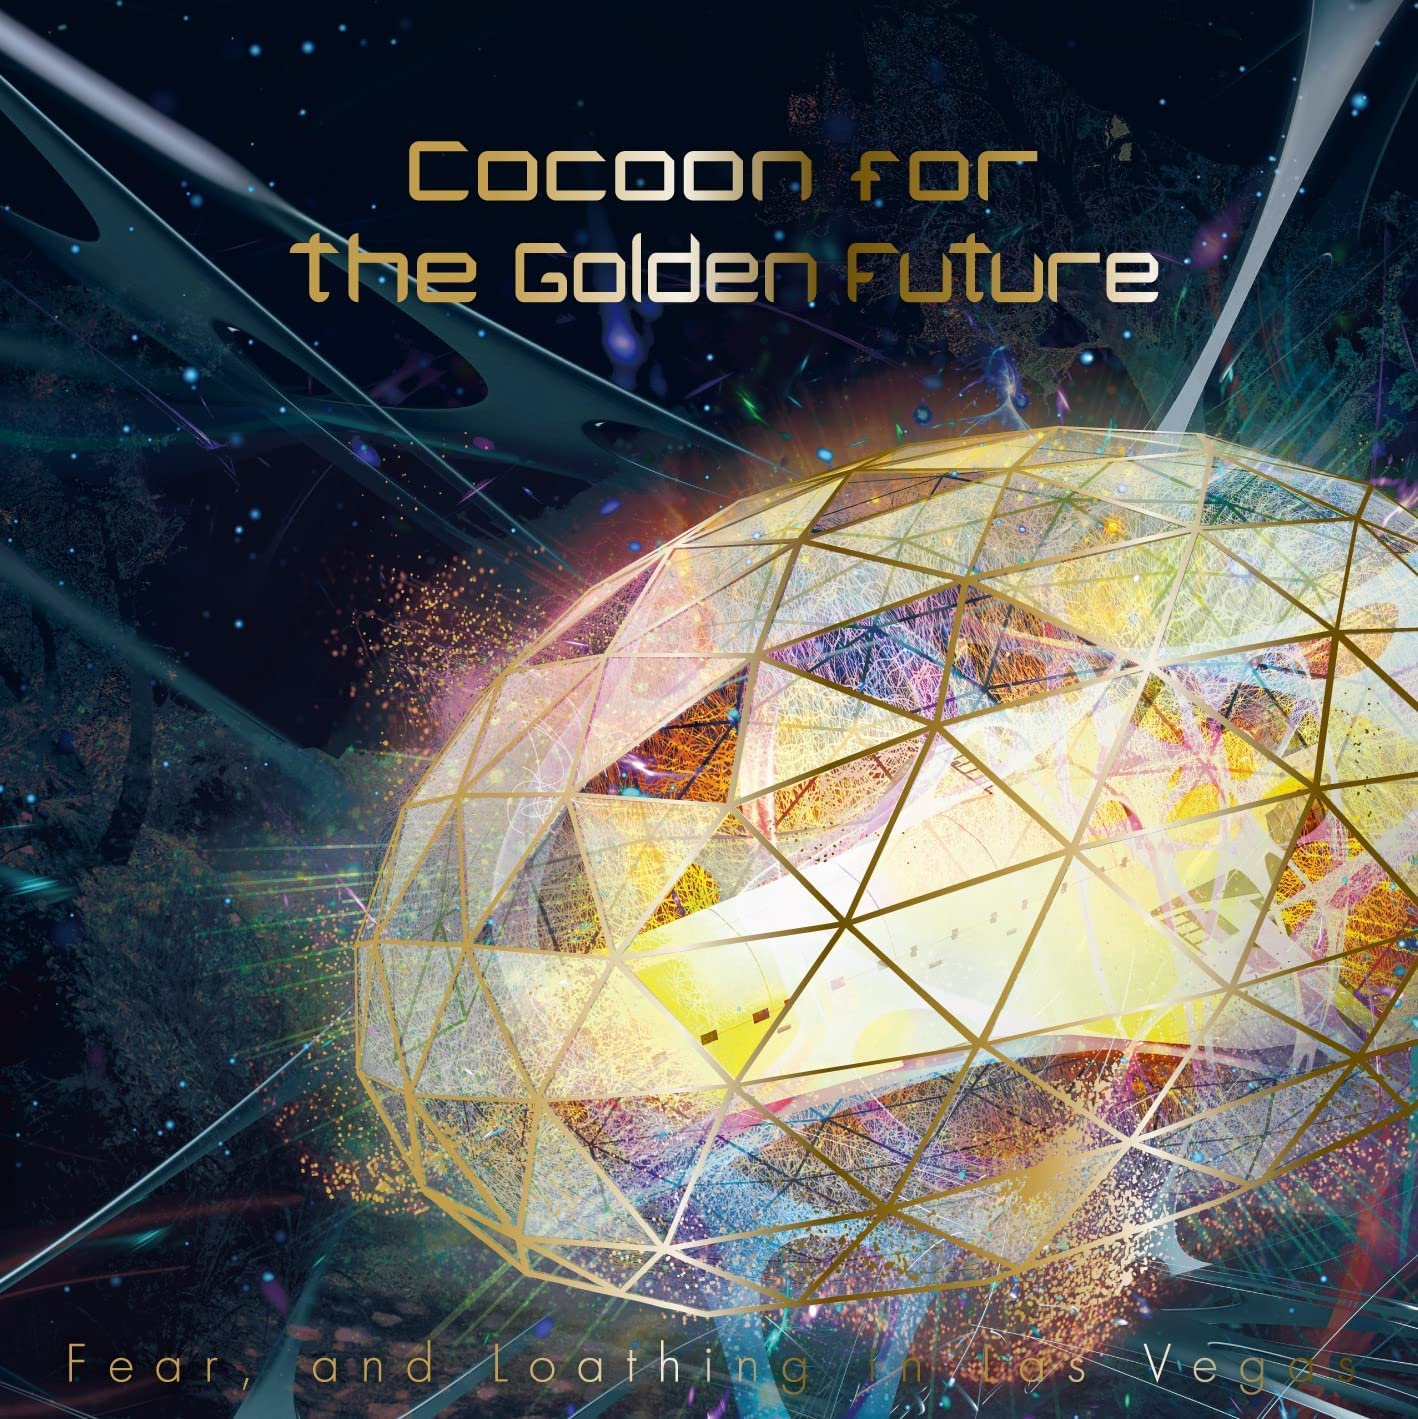 Fear,and Loathing in Las Vegas/Cocoon for the Golden Future